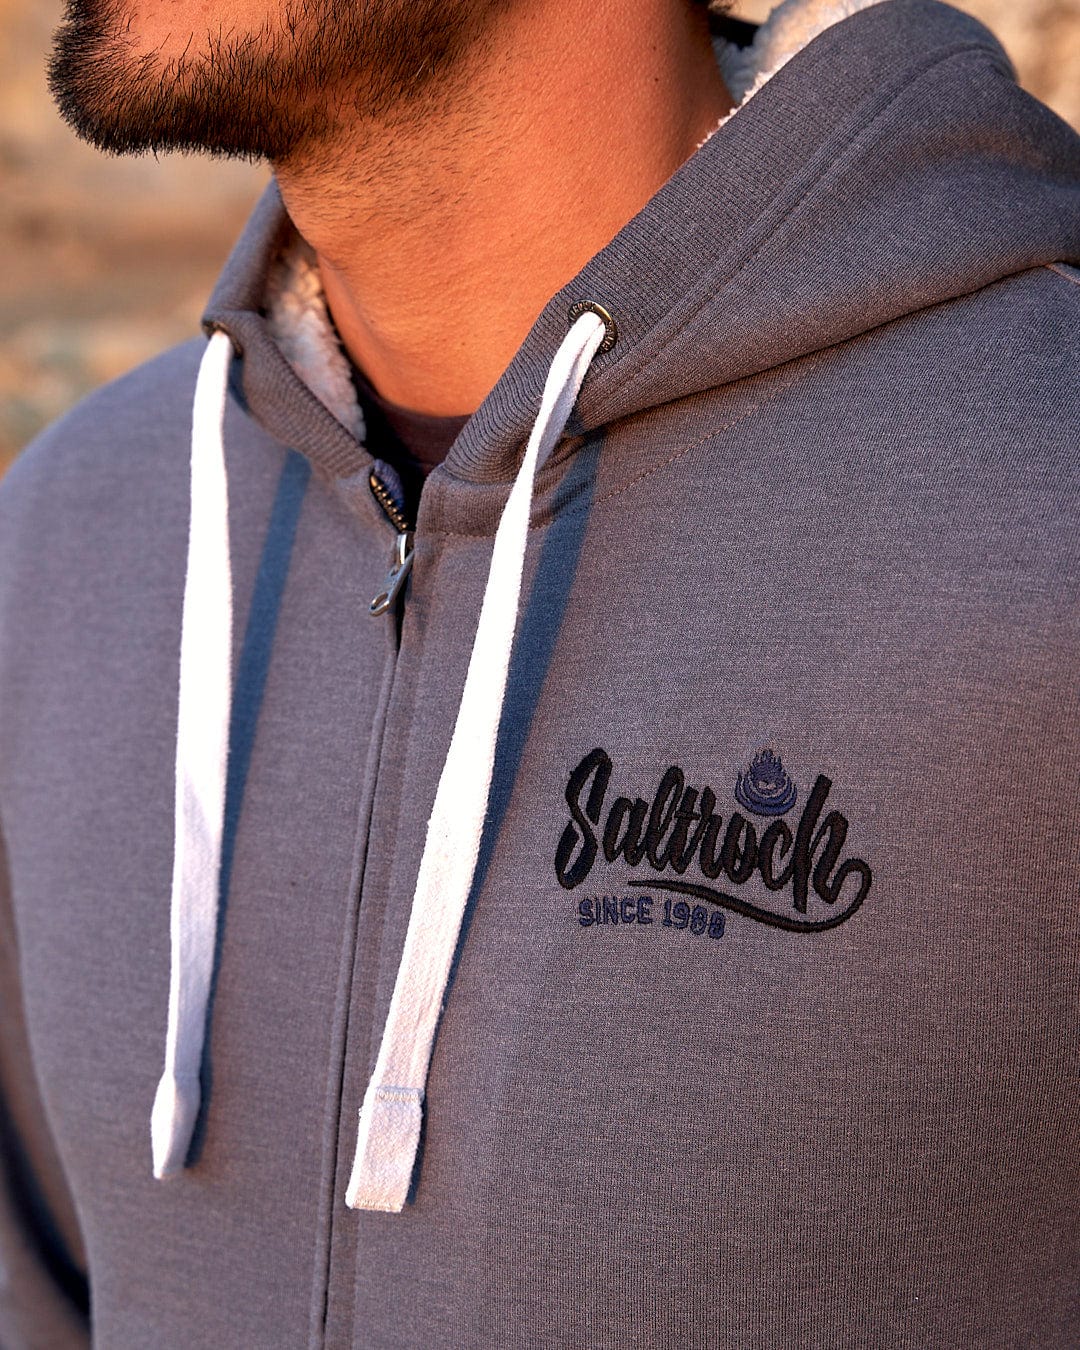 A man wearing a Speed - Mens Borg Lined Hoodie - Grey with the brand name Saltrock on it.